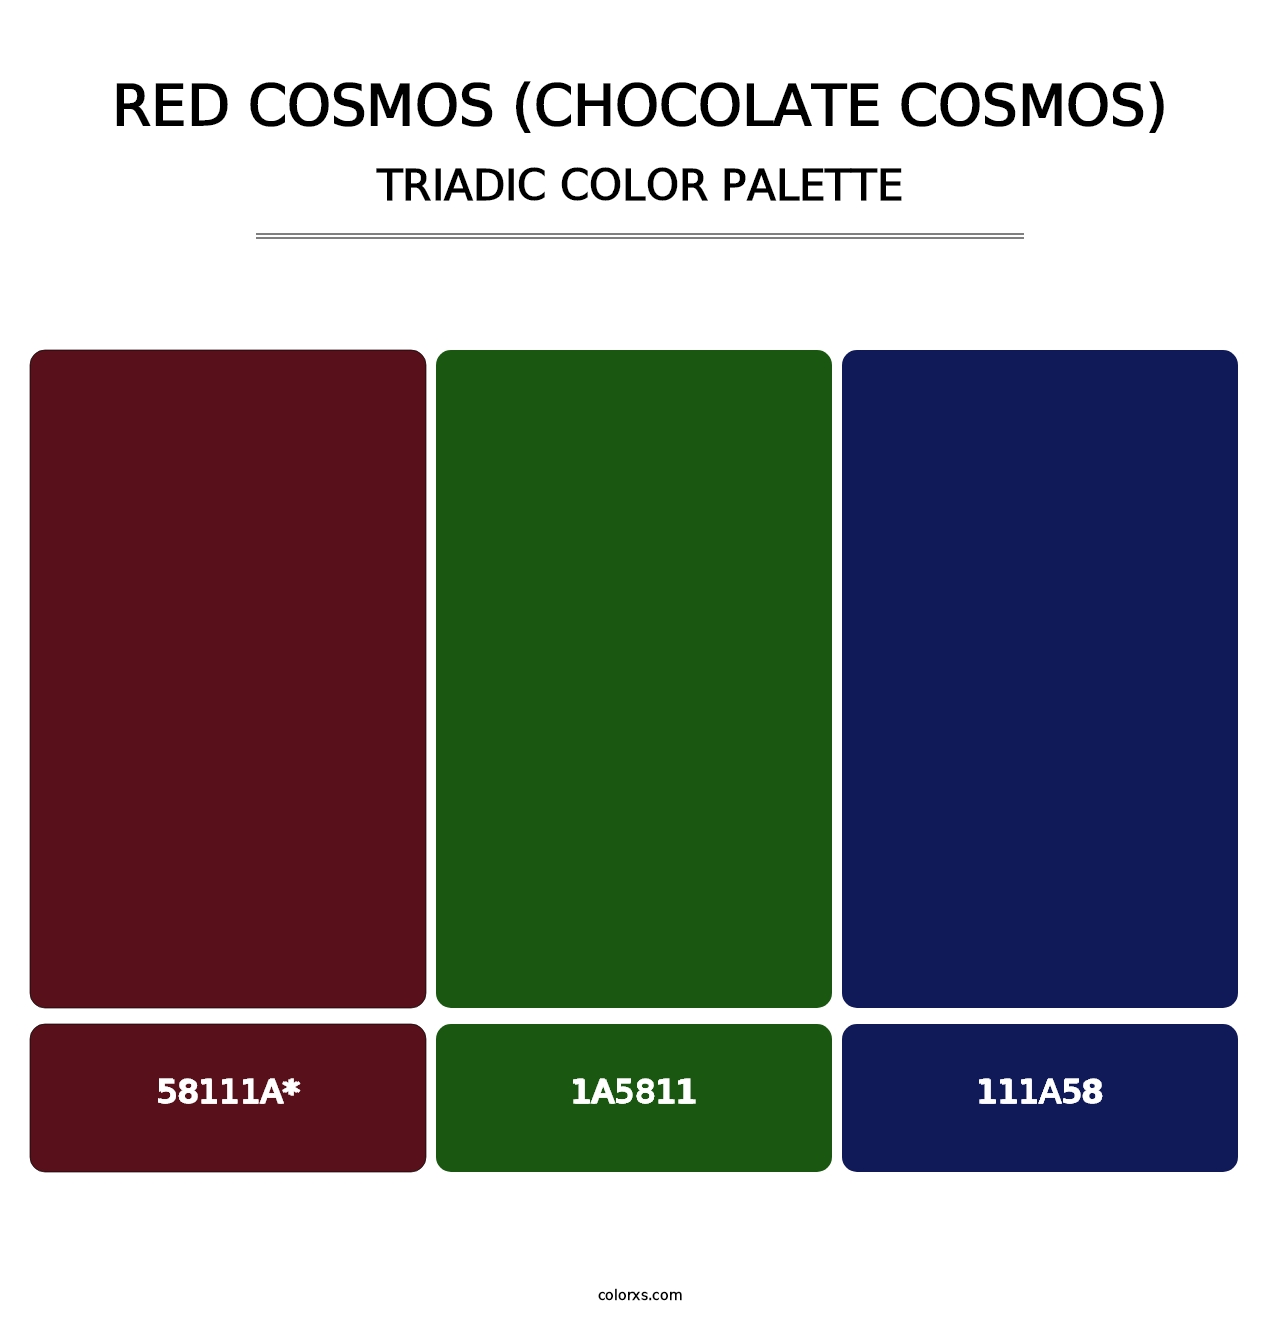 Red Cosmos (Chocolate Cosmos) - Triadic Color Palette